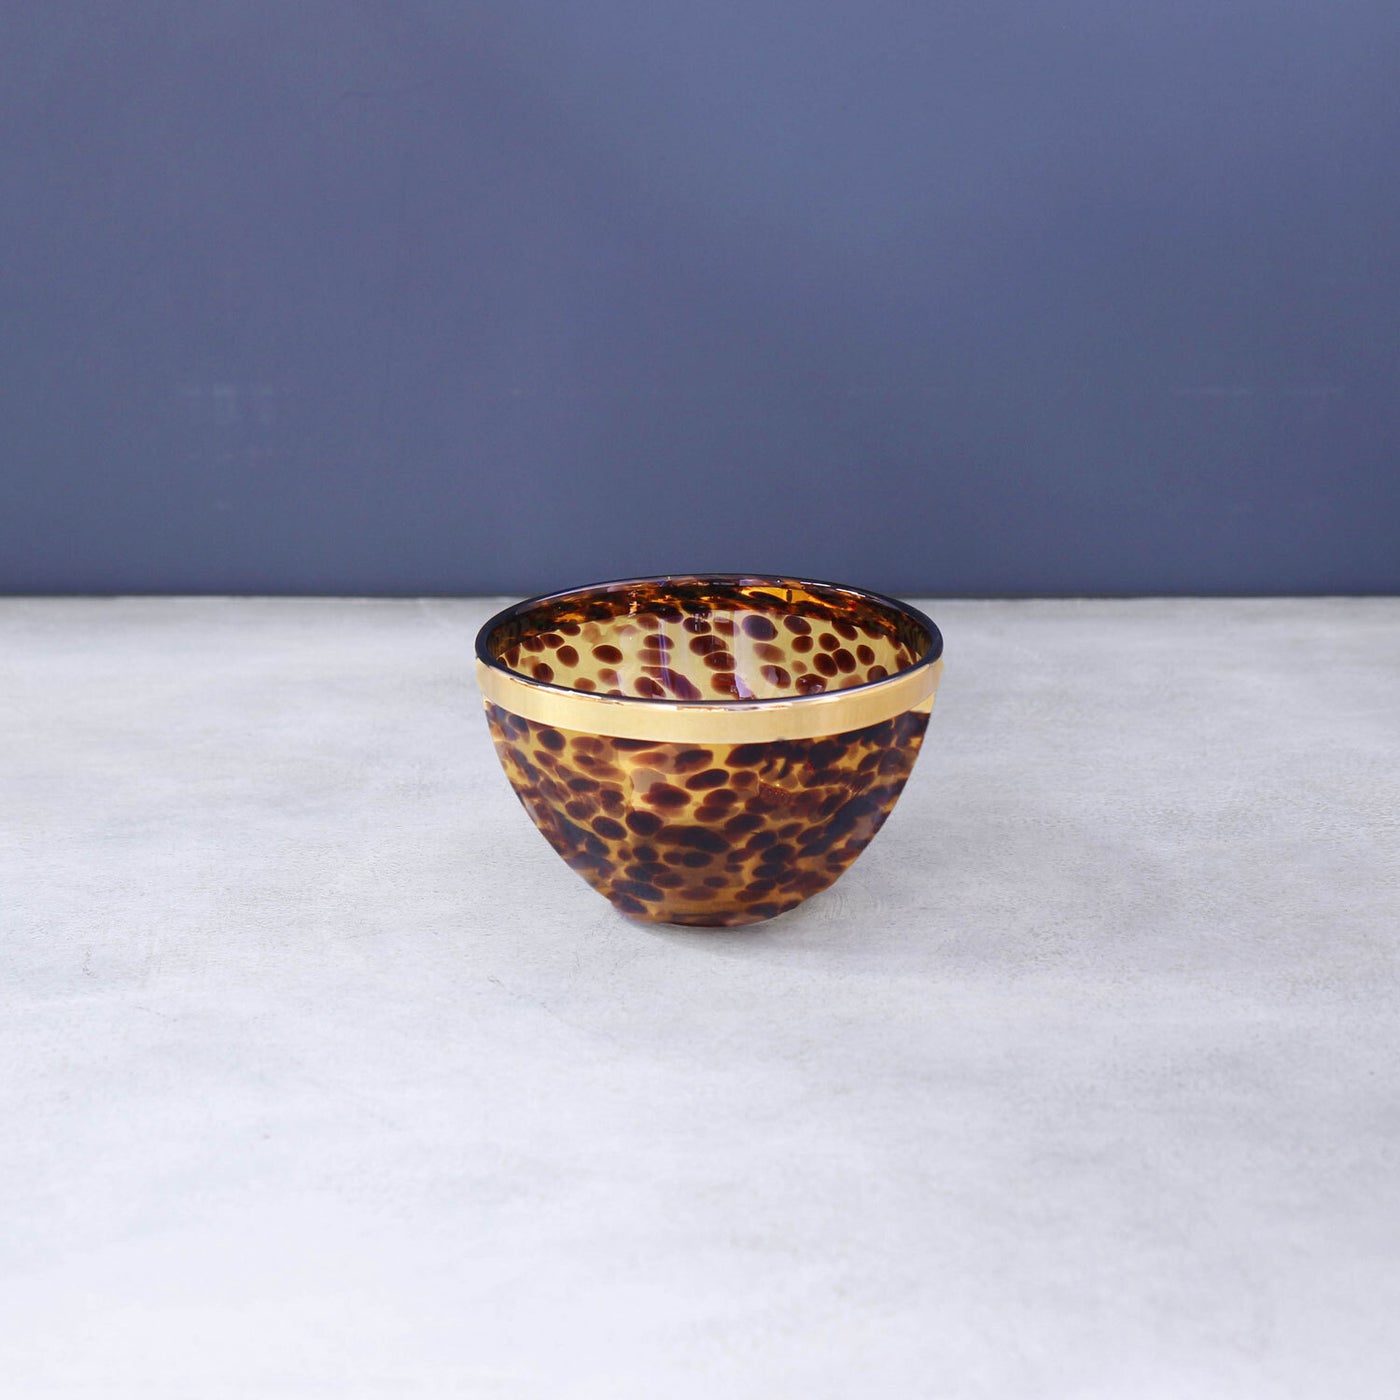 Glass Tortoise and Gold Bowl 5.5"